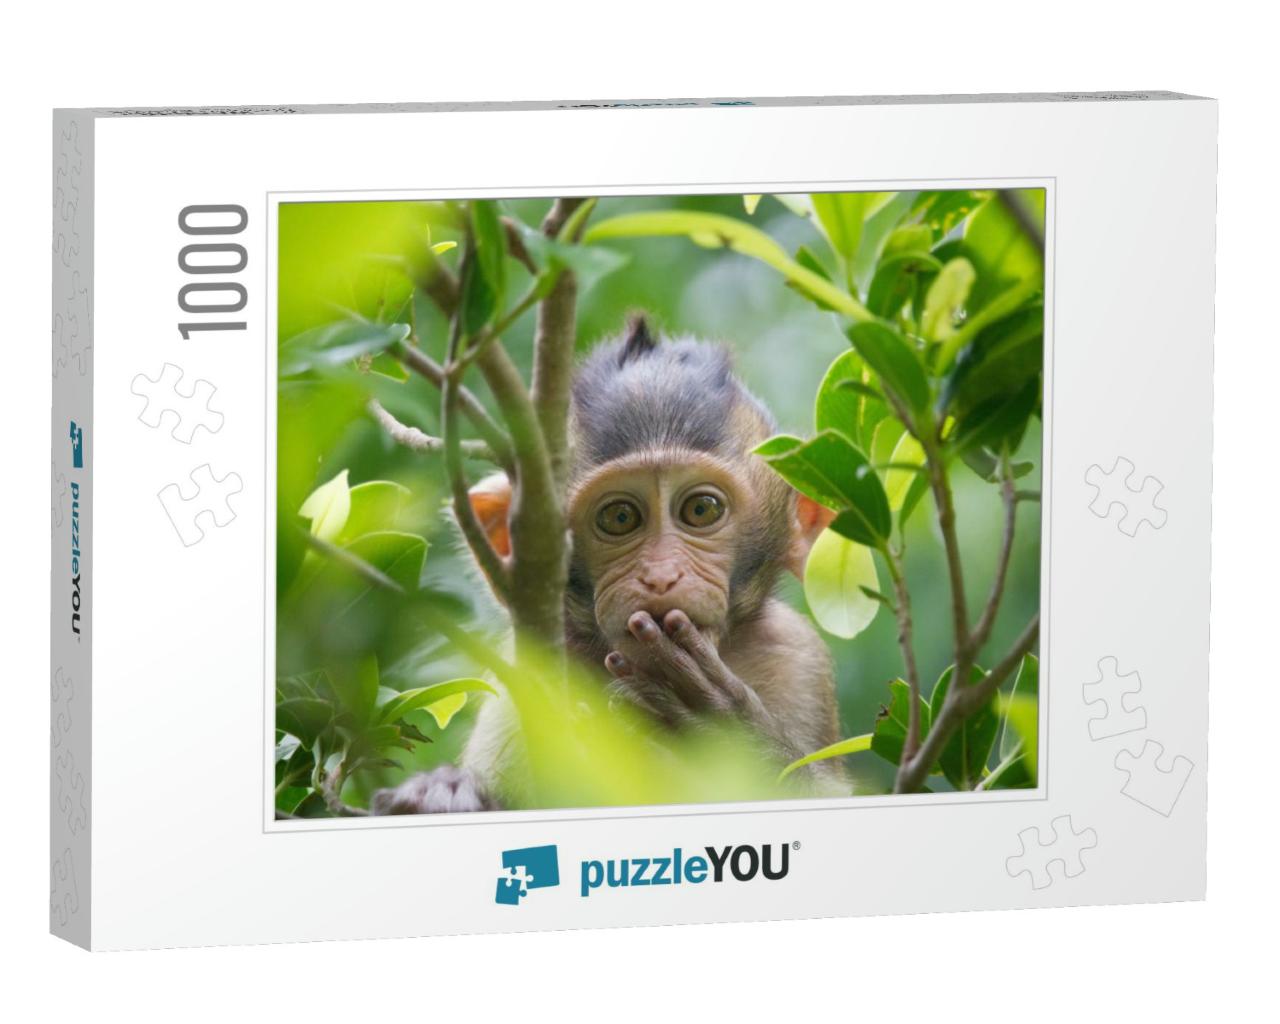 A Cute Monkey Lives in a Natural Forest of Thailand... Jigsaw Puzzle with 1000 pieces